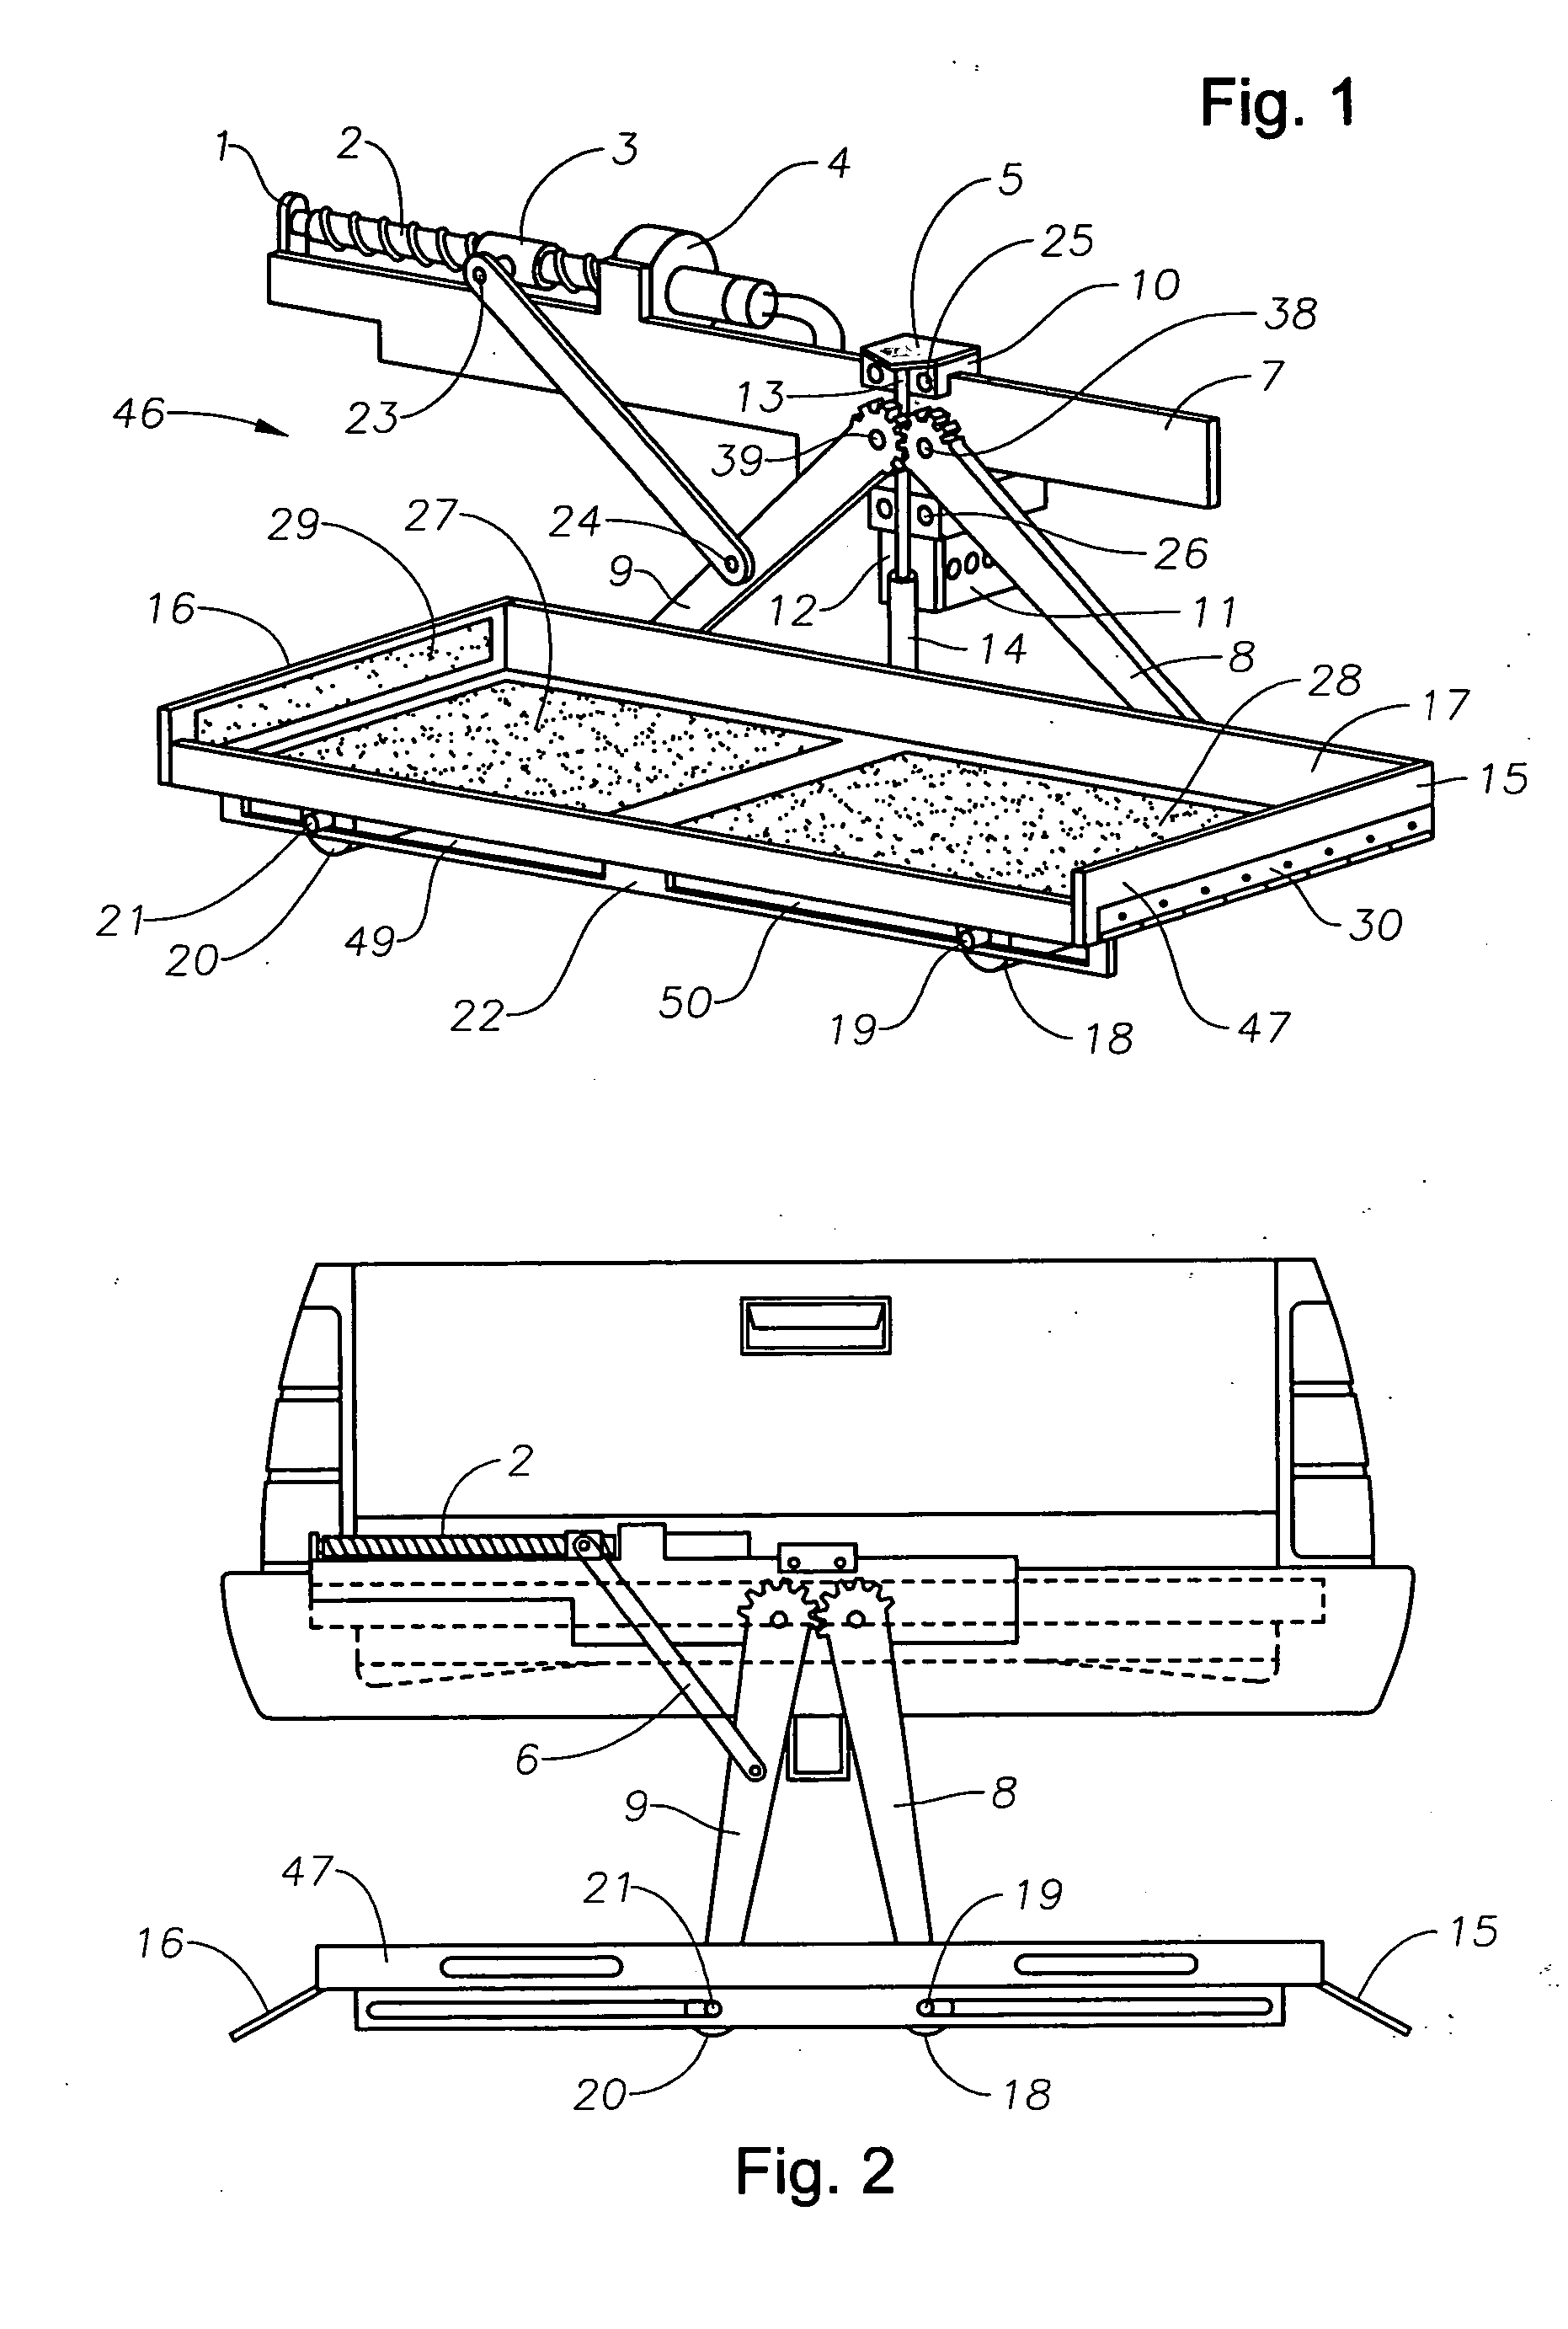 Apparatus and method for lifting and carrying objects on a vehicle